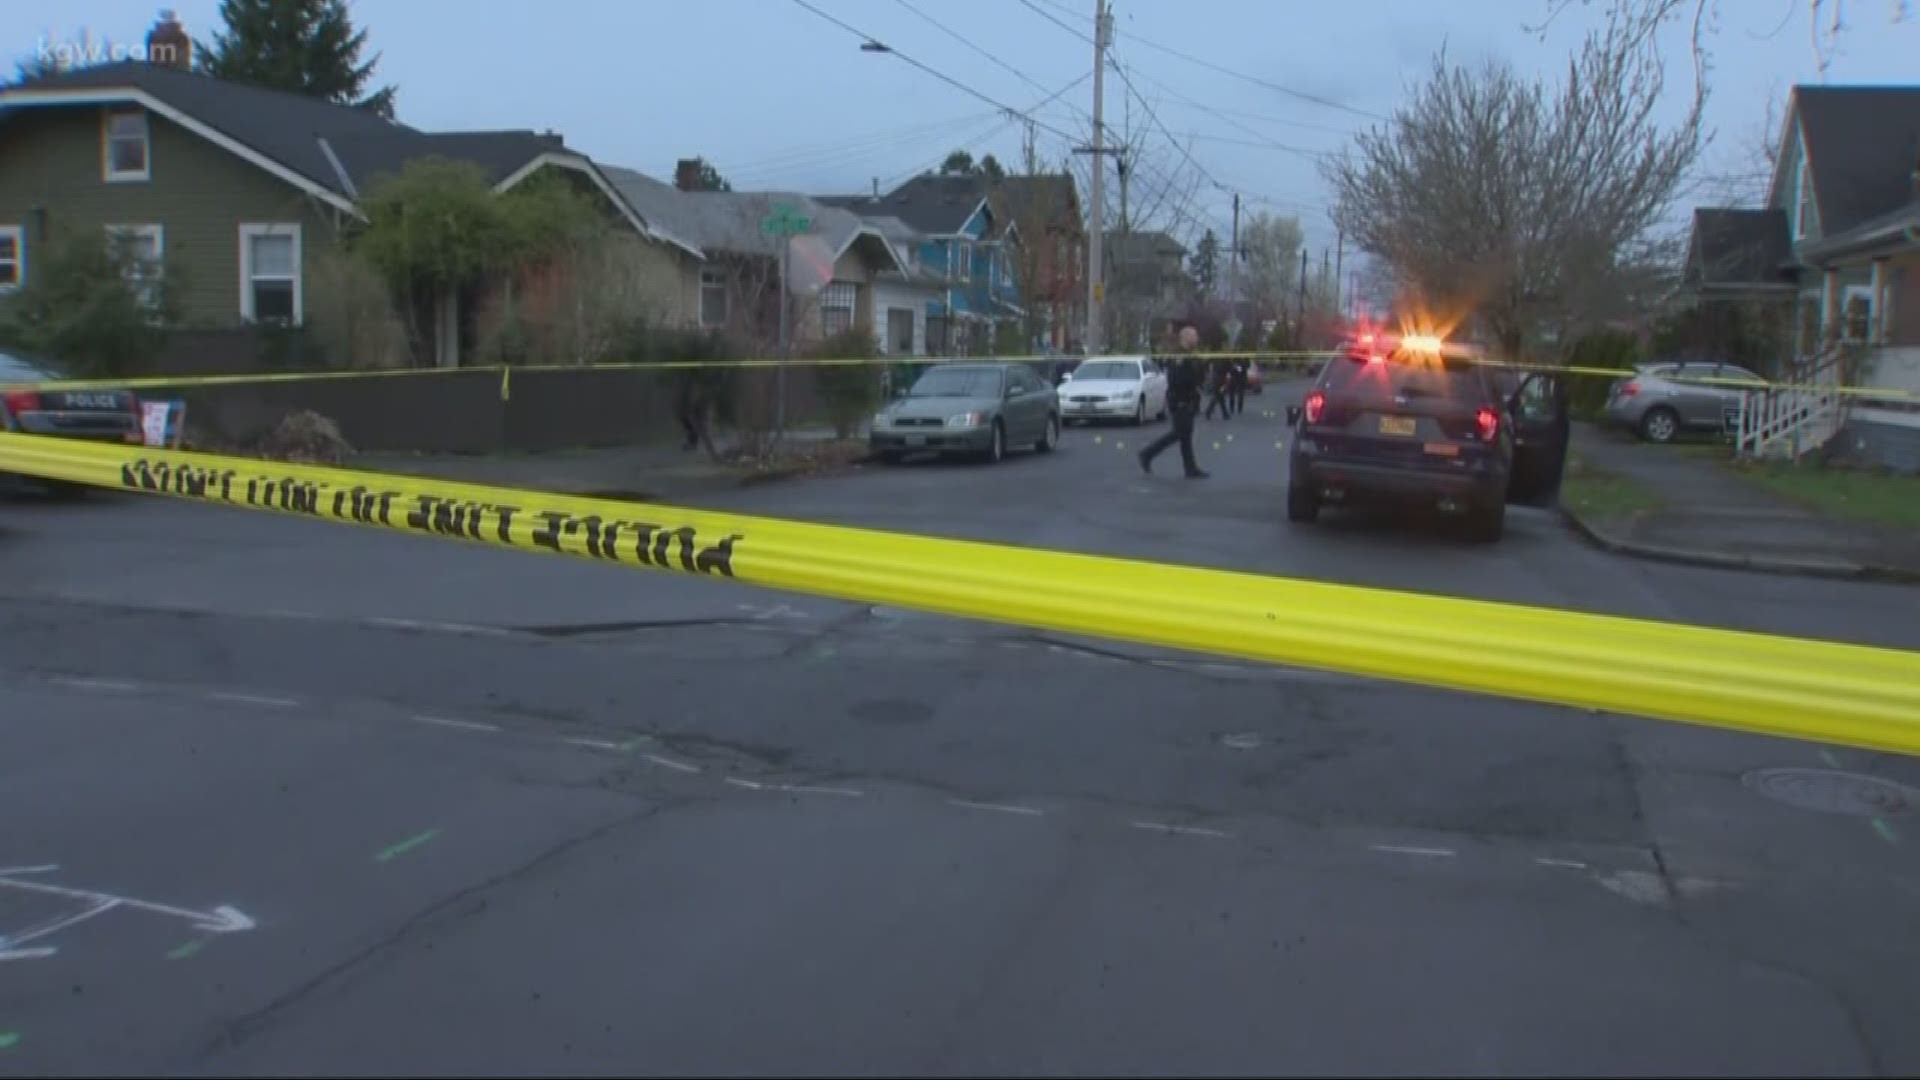 Police say several recent gang shootings were in response to a homicide last month.